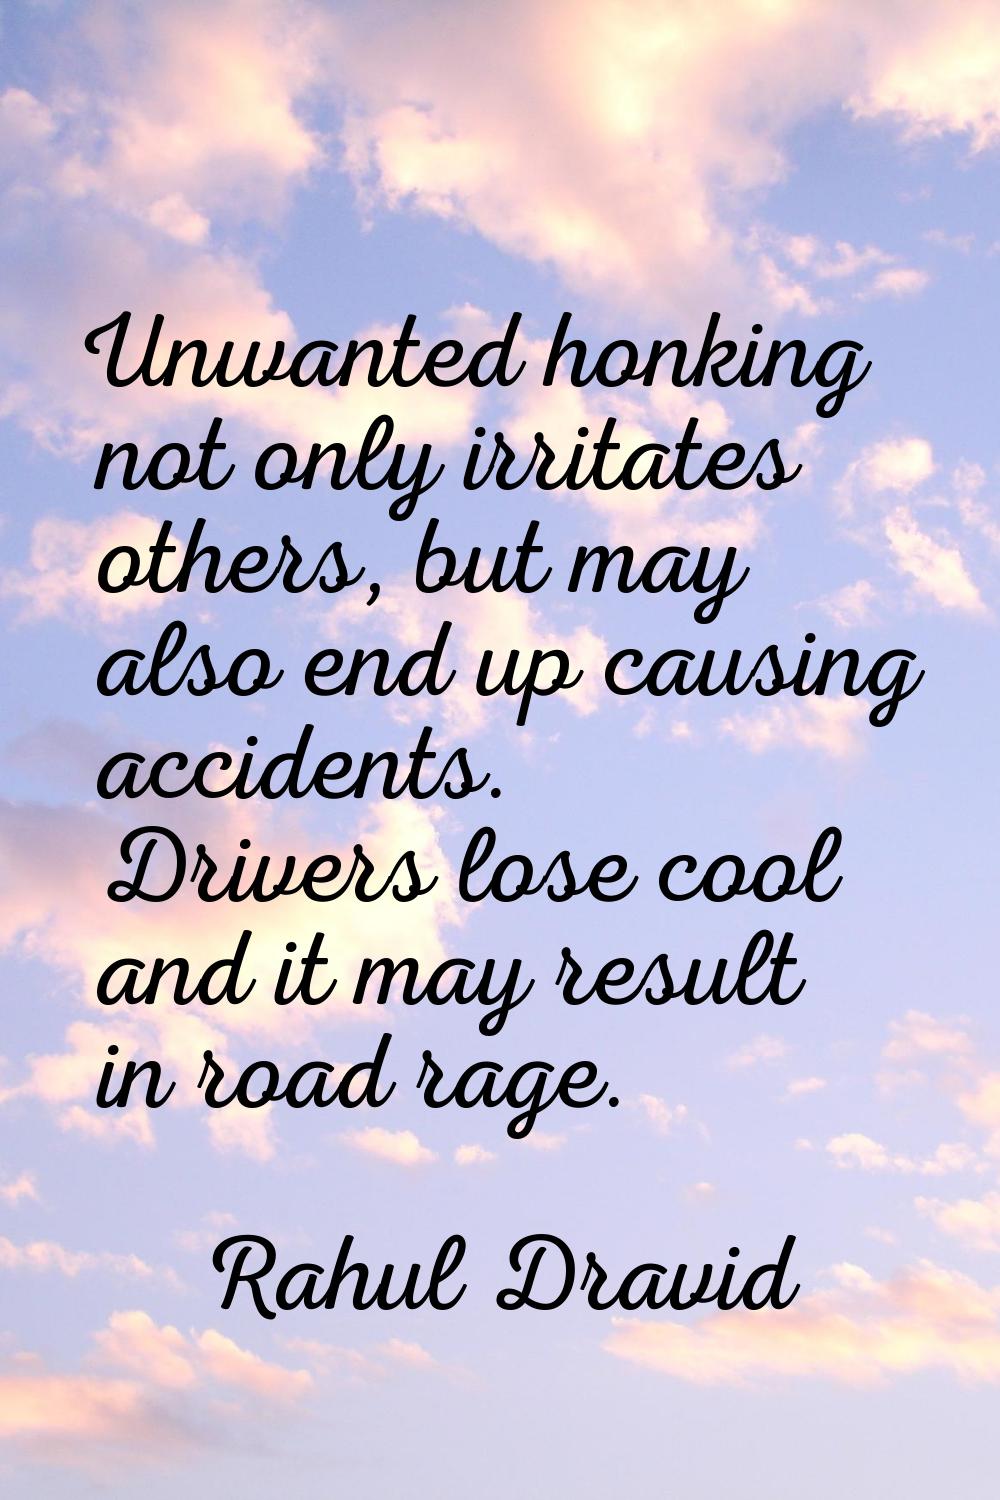 Unwanted honking not only irritates others, but may also end up causing accidents. Drivers lose coo